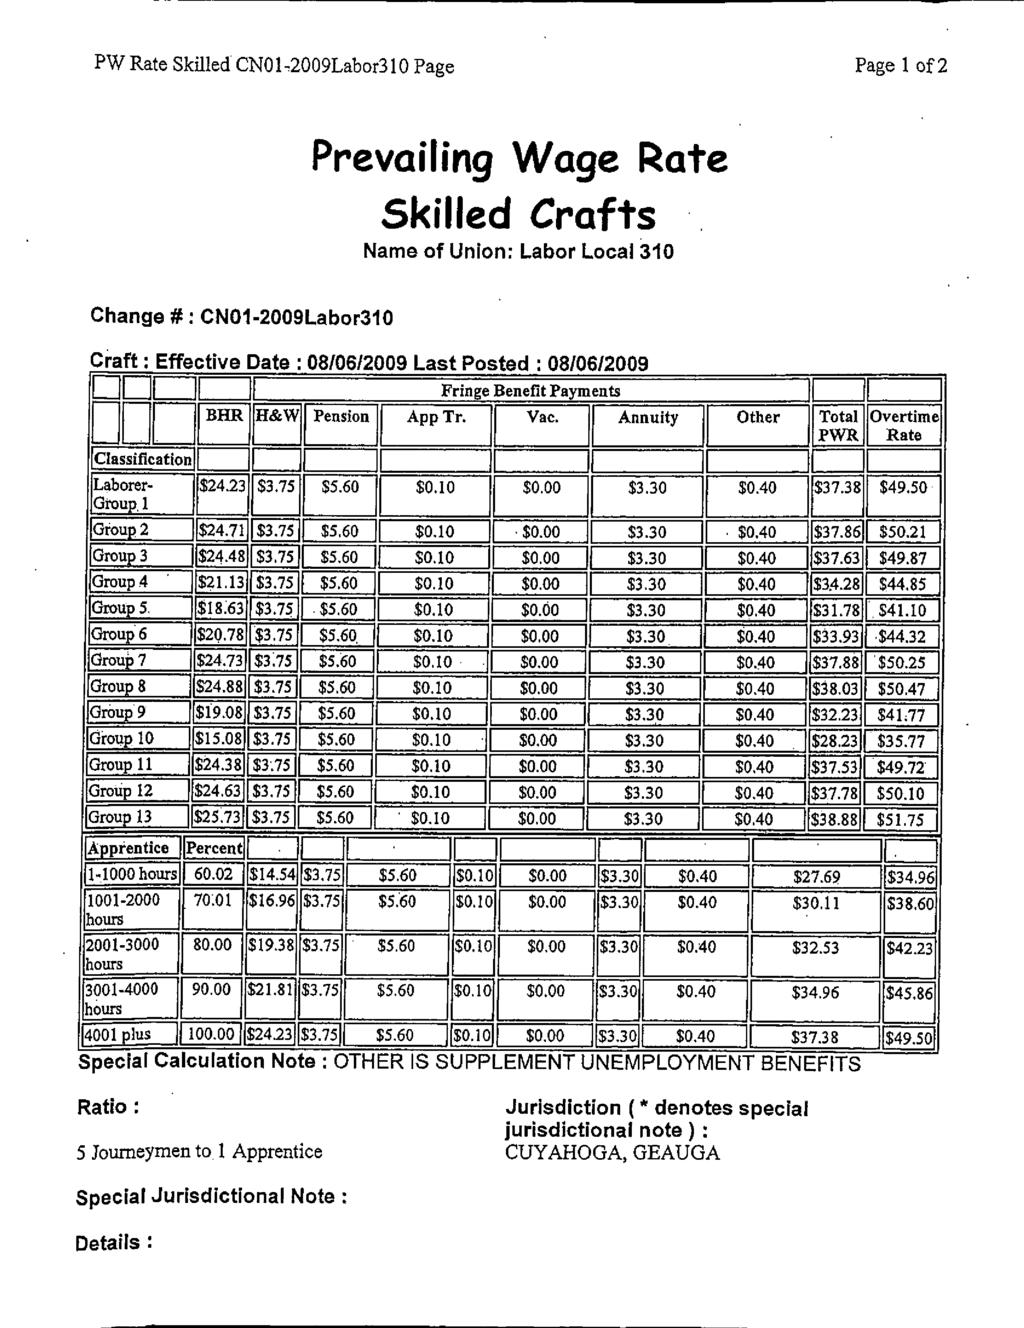 PW Rate Skilled CNO1-2009Labor310 Page Page 1 of 2 Change #: CNO1-2009Labor310 Prevailing Wage Rate Skilled Crafts Name of Union: Labor Local 310 Craft : Effective Date : 08/06/2009 Last Posted :